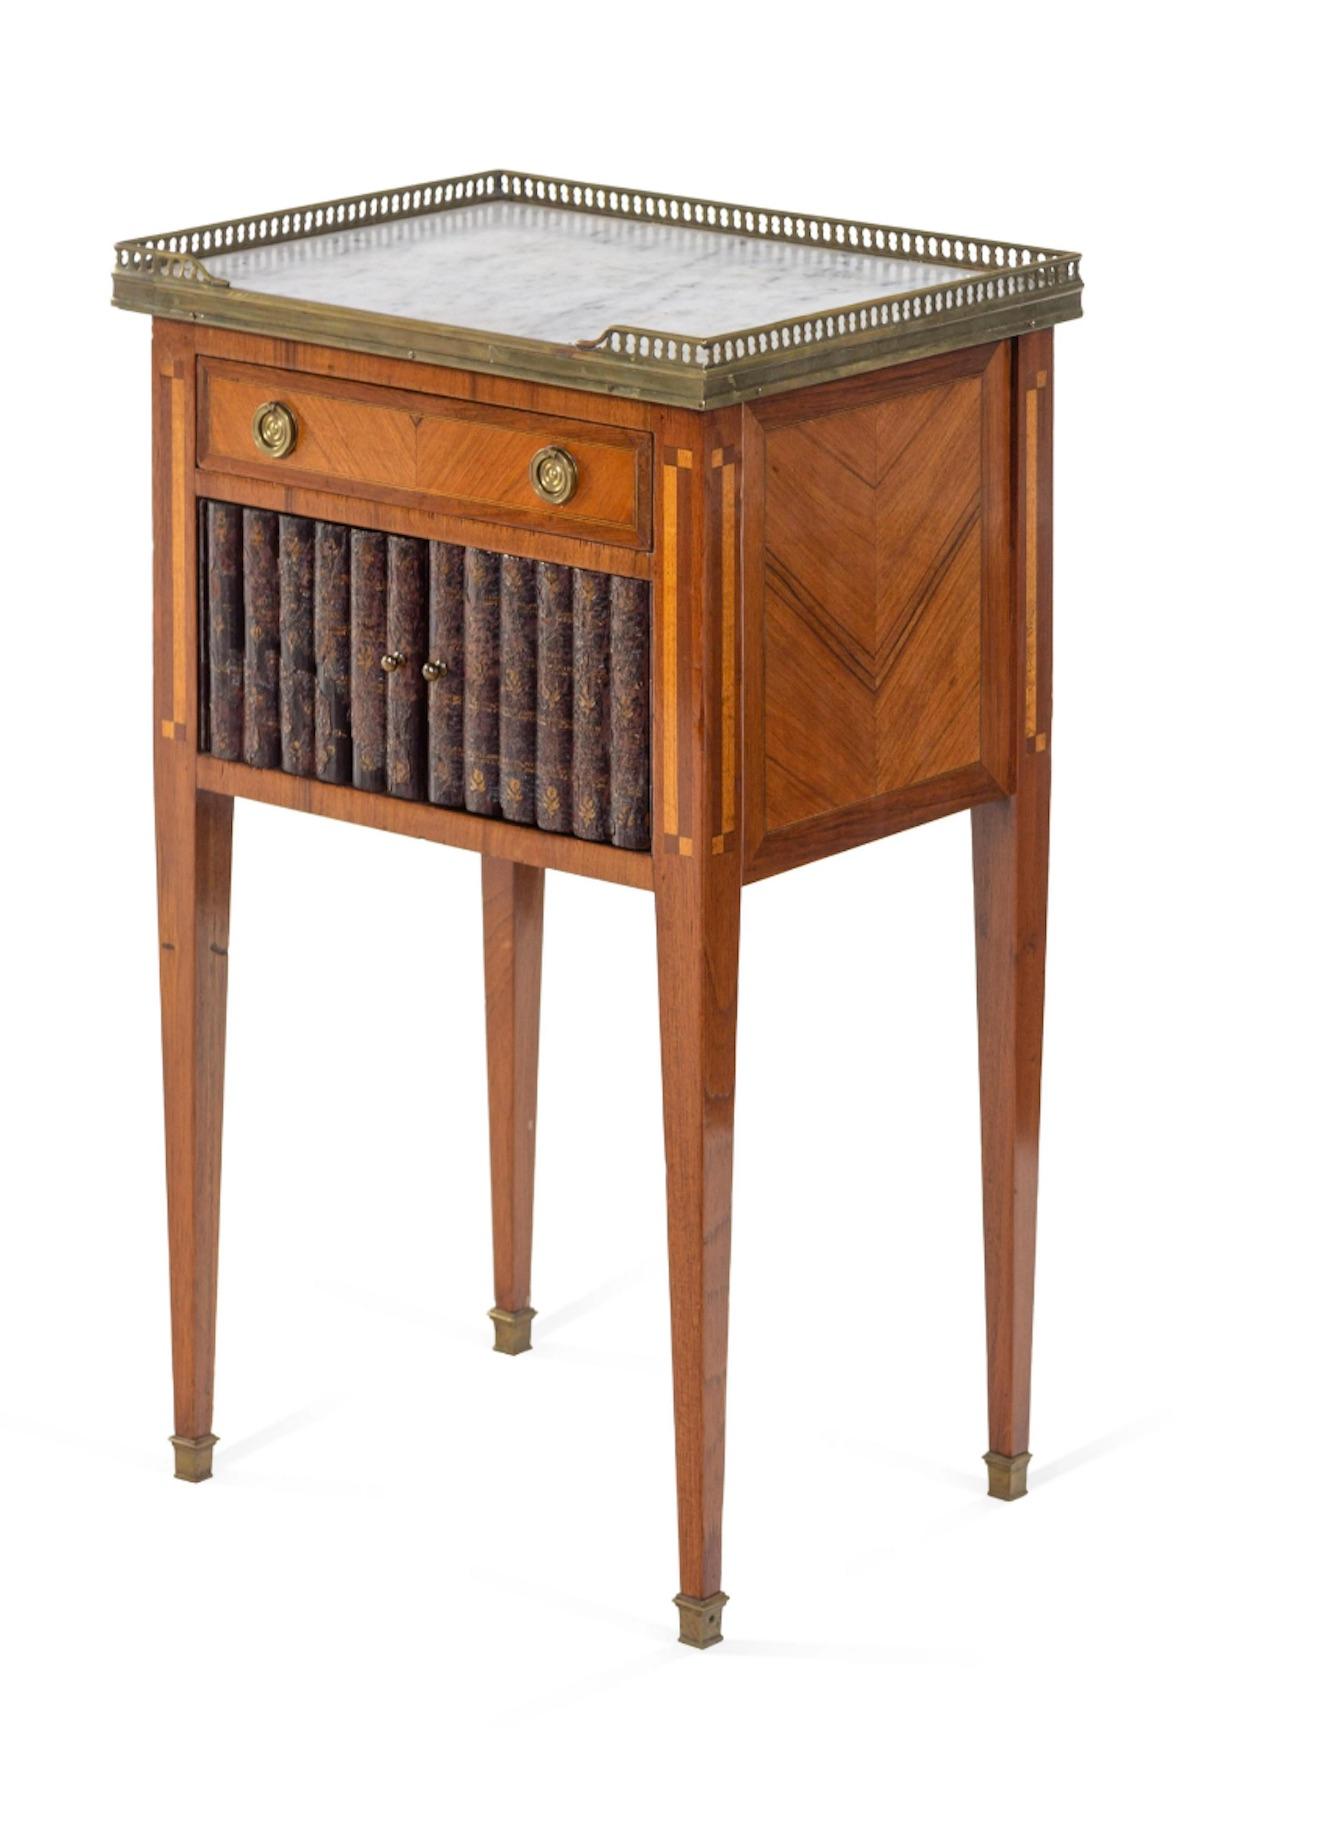 Charming 19th century side table, faux book doors, marble top, brass gallery. Measure: 28